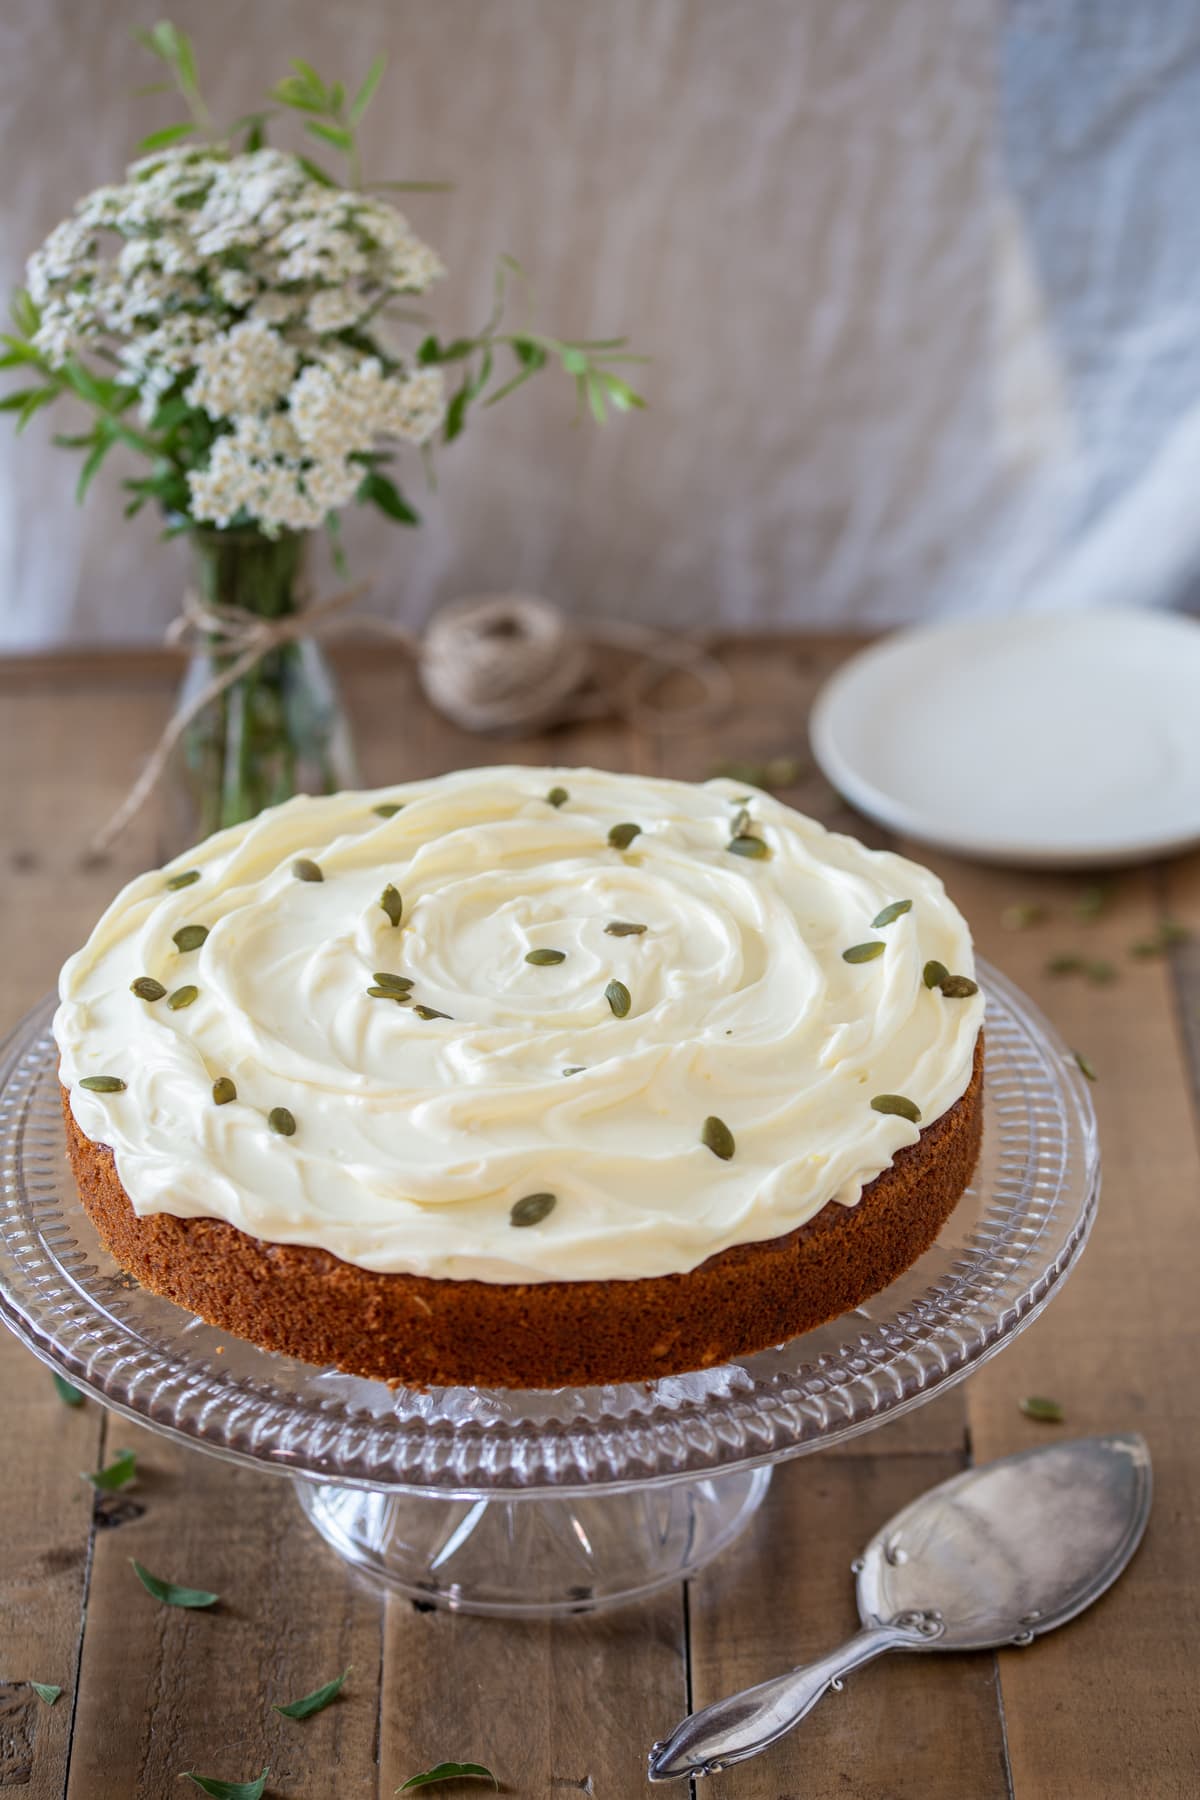 Carrot cake with pumpkin seeds over the frosting.